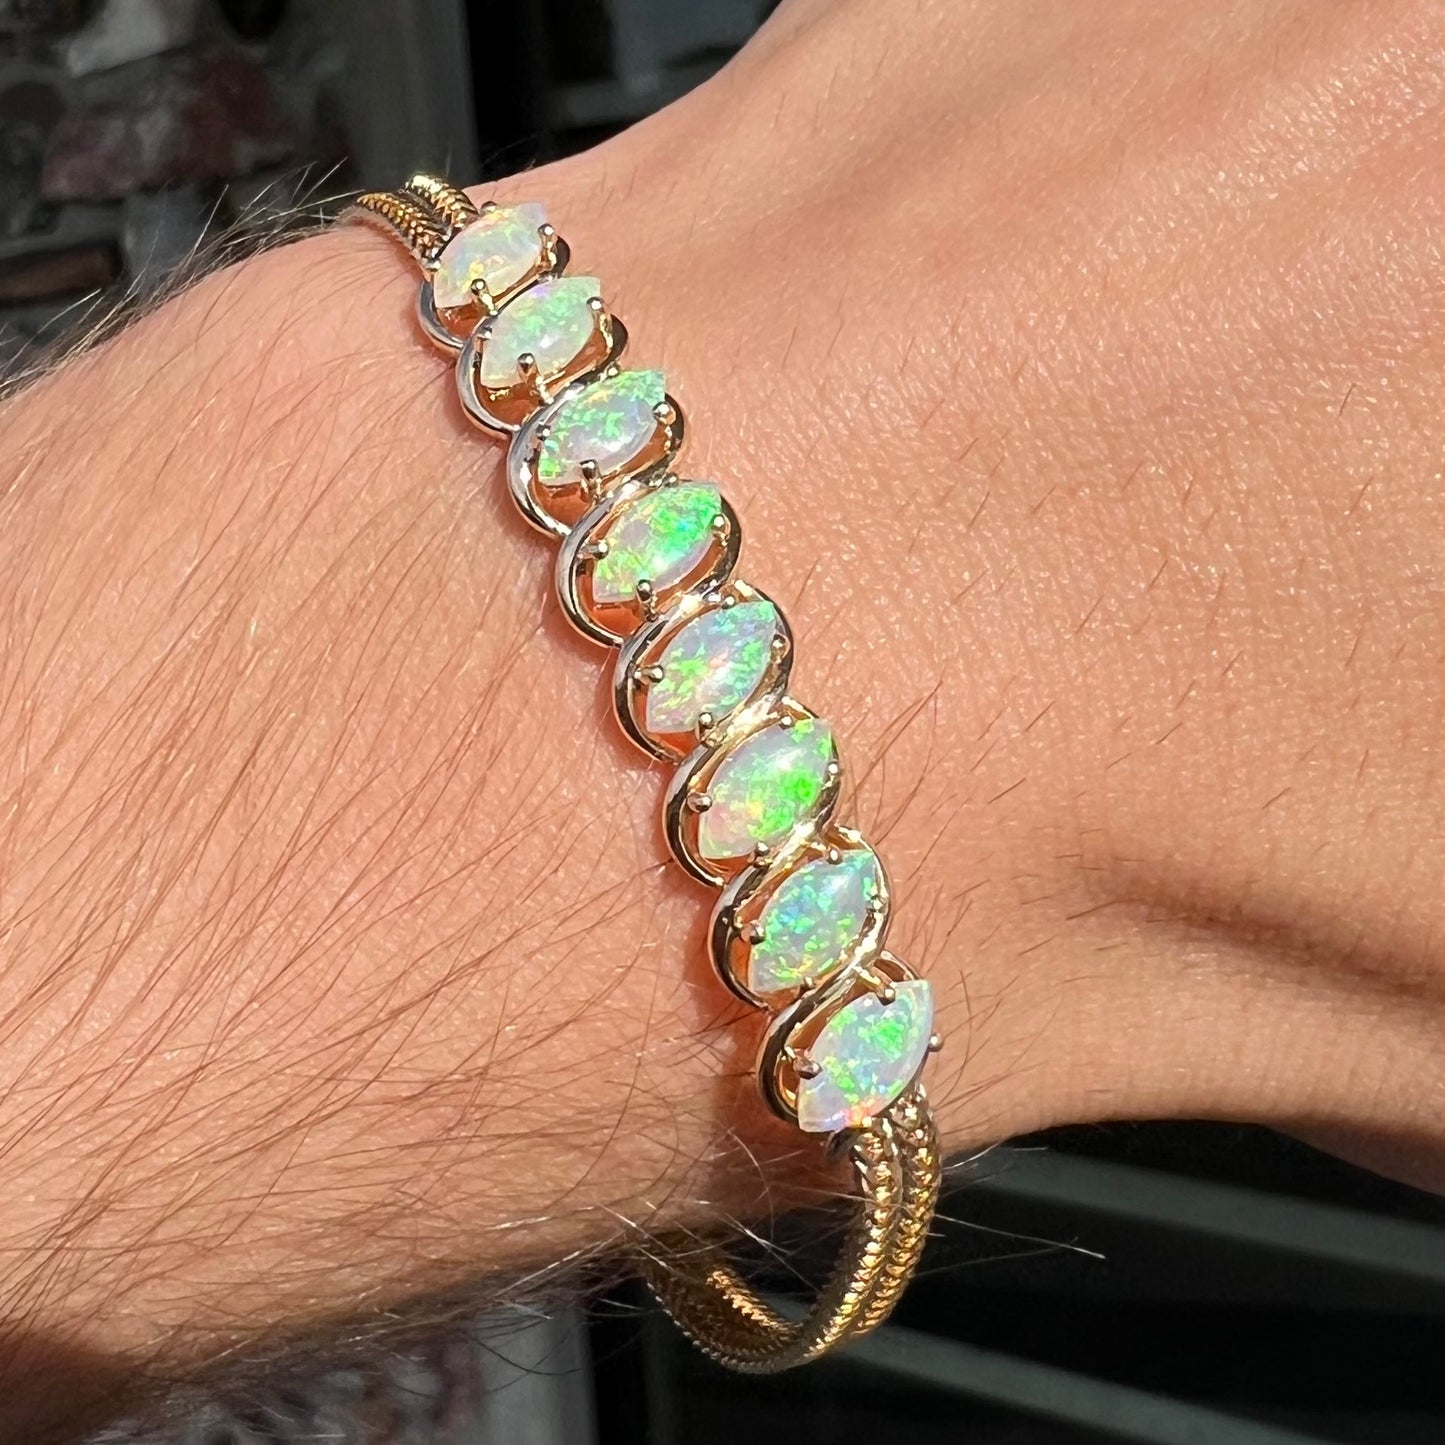 A ladies' yellow gold bracelet prong set with eight natural, marquise cabochon cut opals.